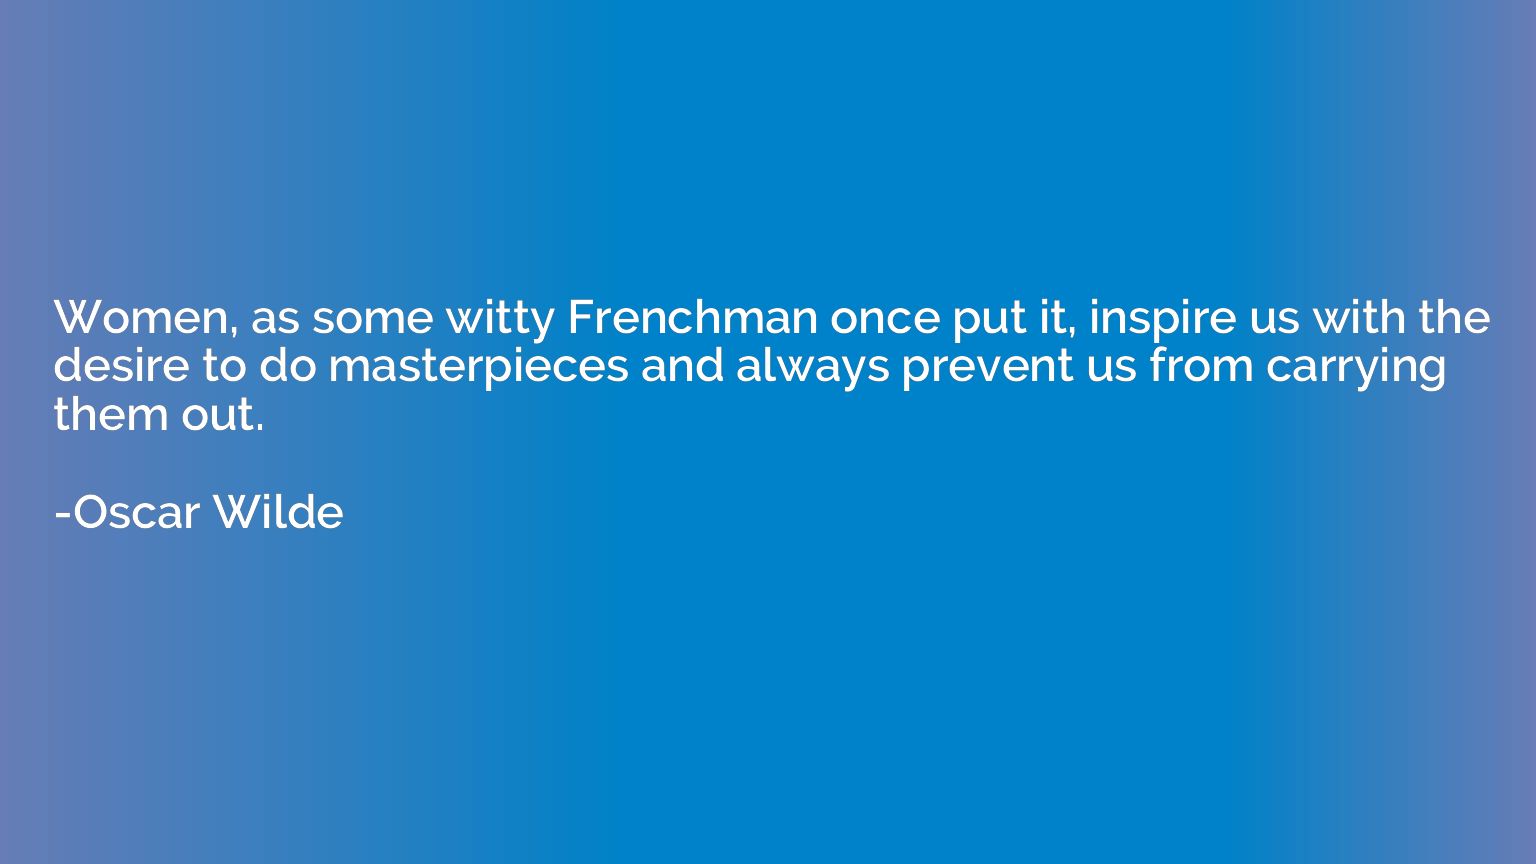 Women, as some witty Frenchman once put it, inspire us with 